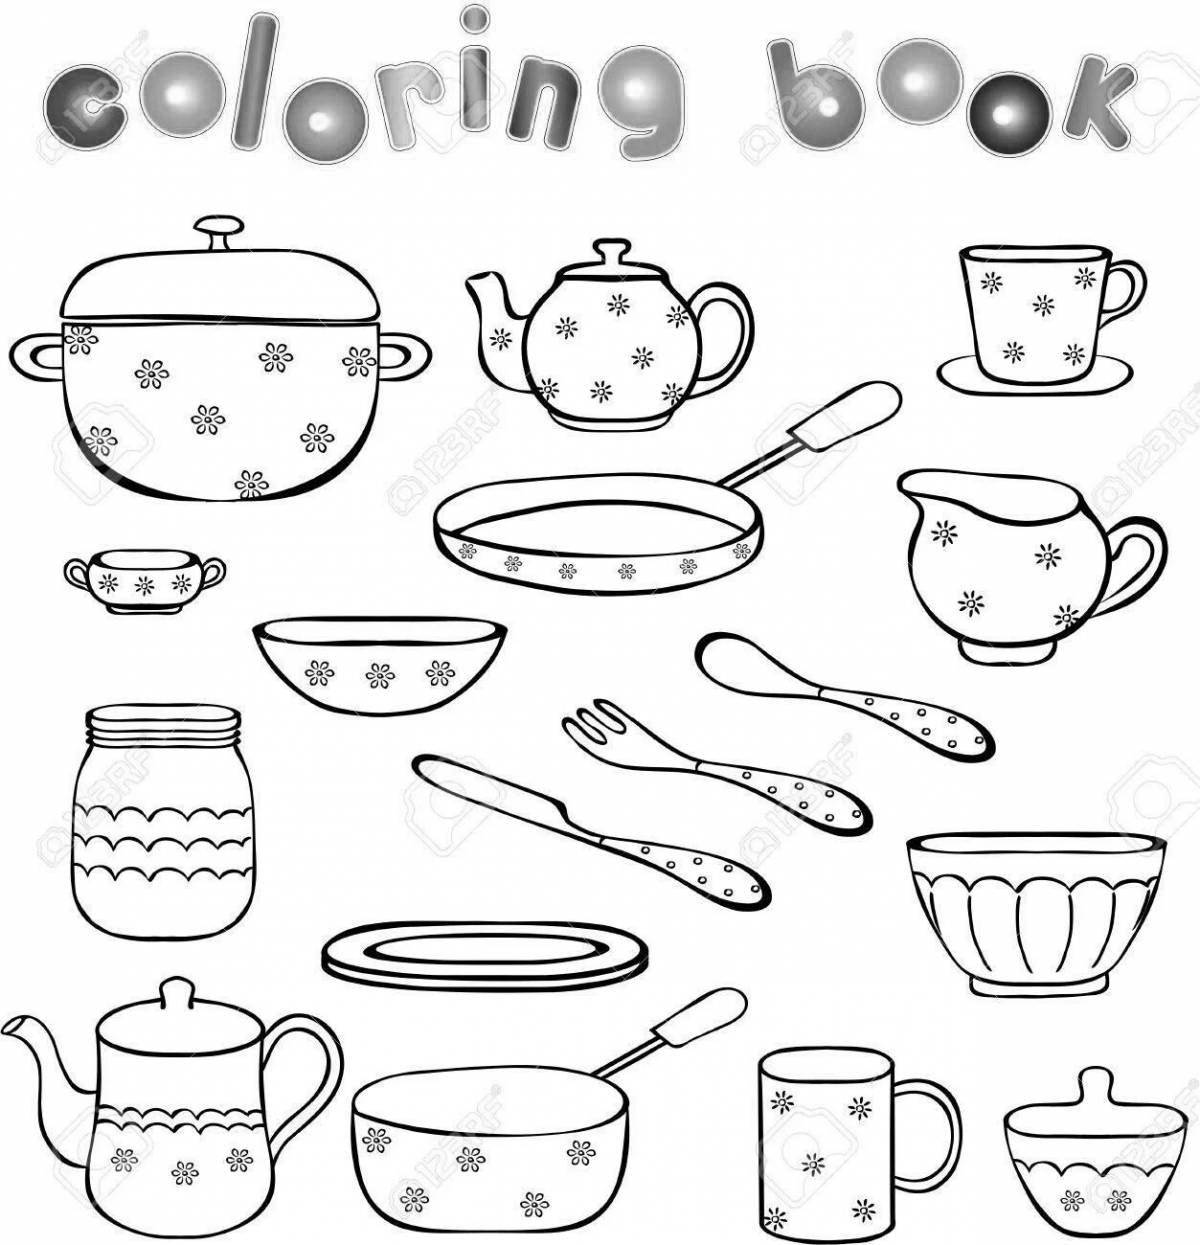 Coloring bright dishes